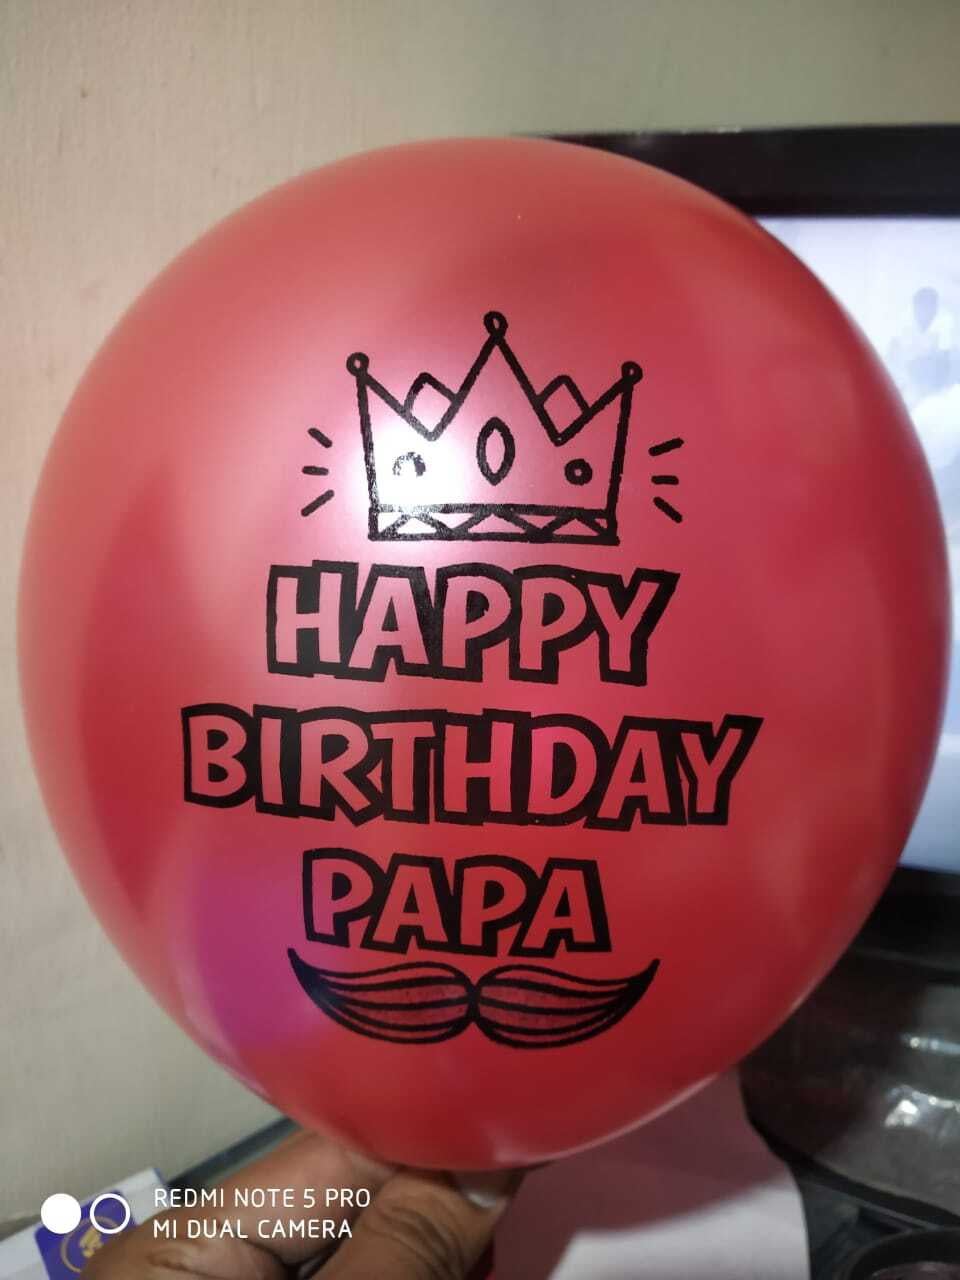 The Magic Balloons Store- Happy Birthday Dad Latex Balloons Pack of 30 pcs